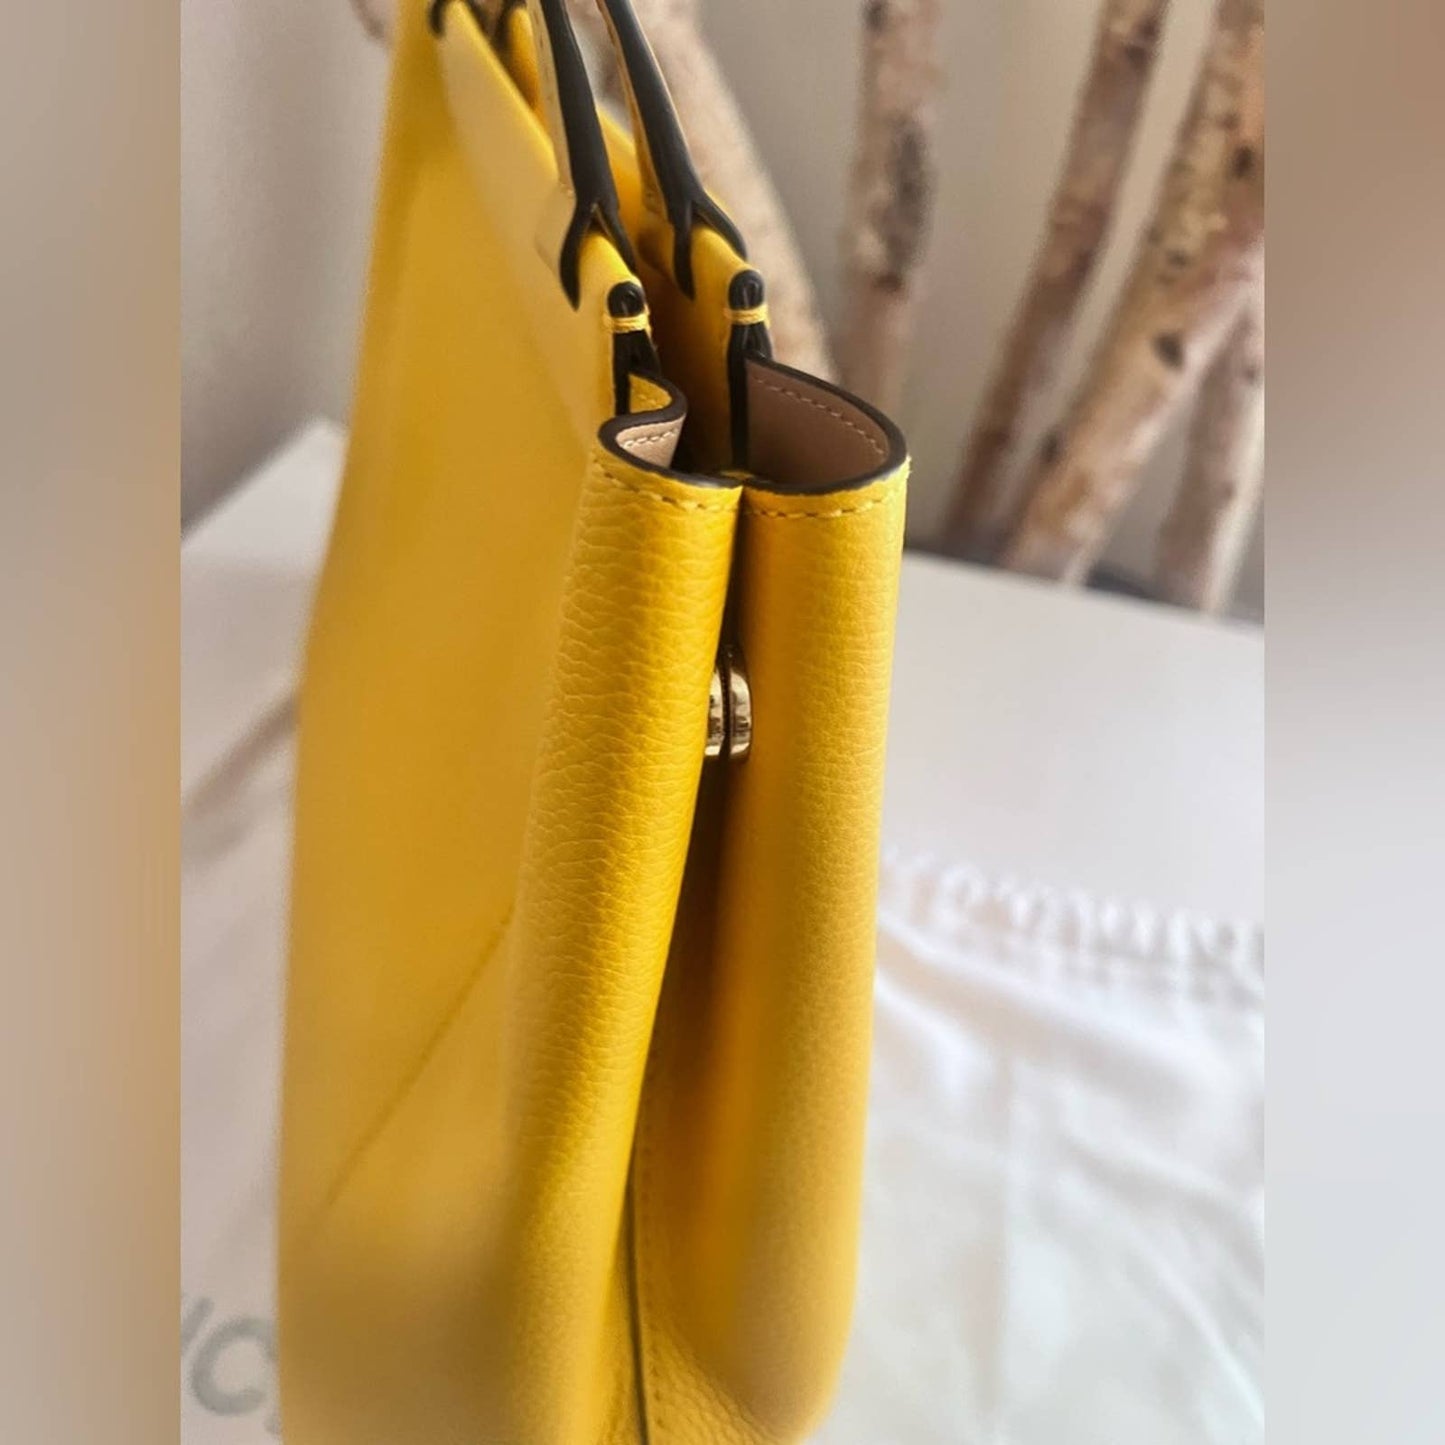 MICHAEL Michael KORS Yellow Meridith Sunflower Leather Tote NWT $298